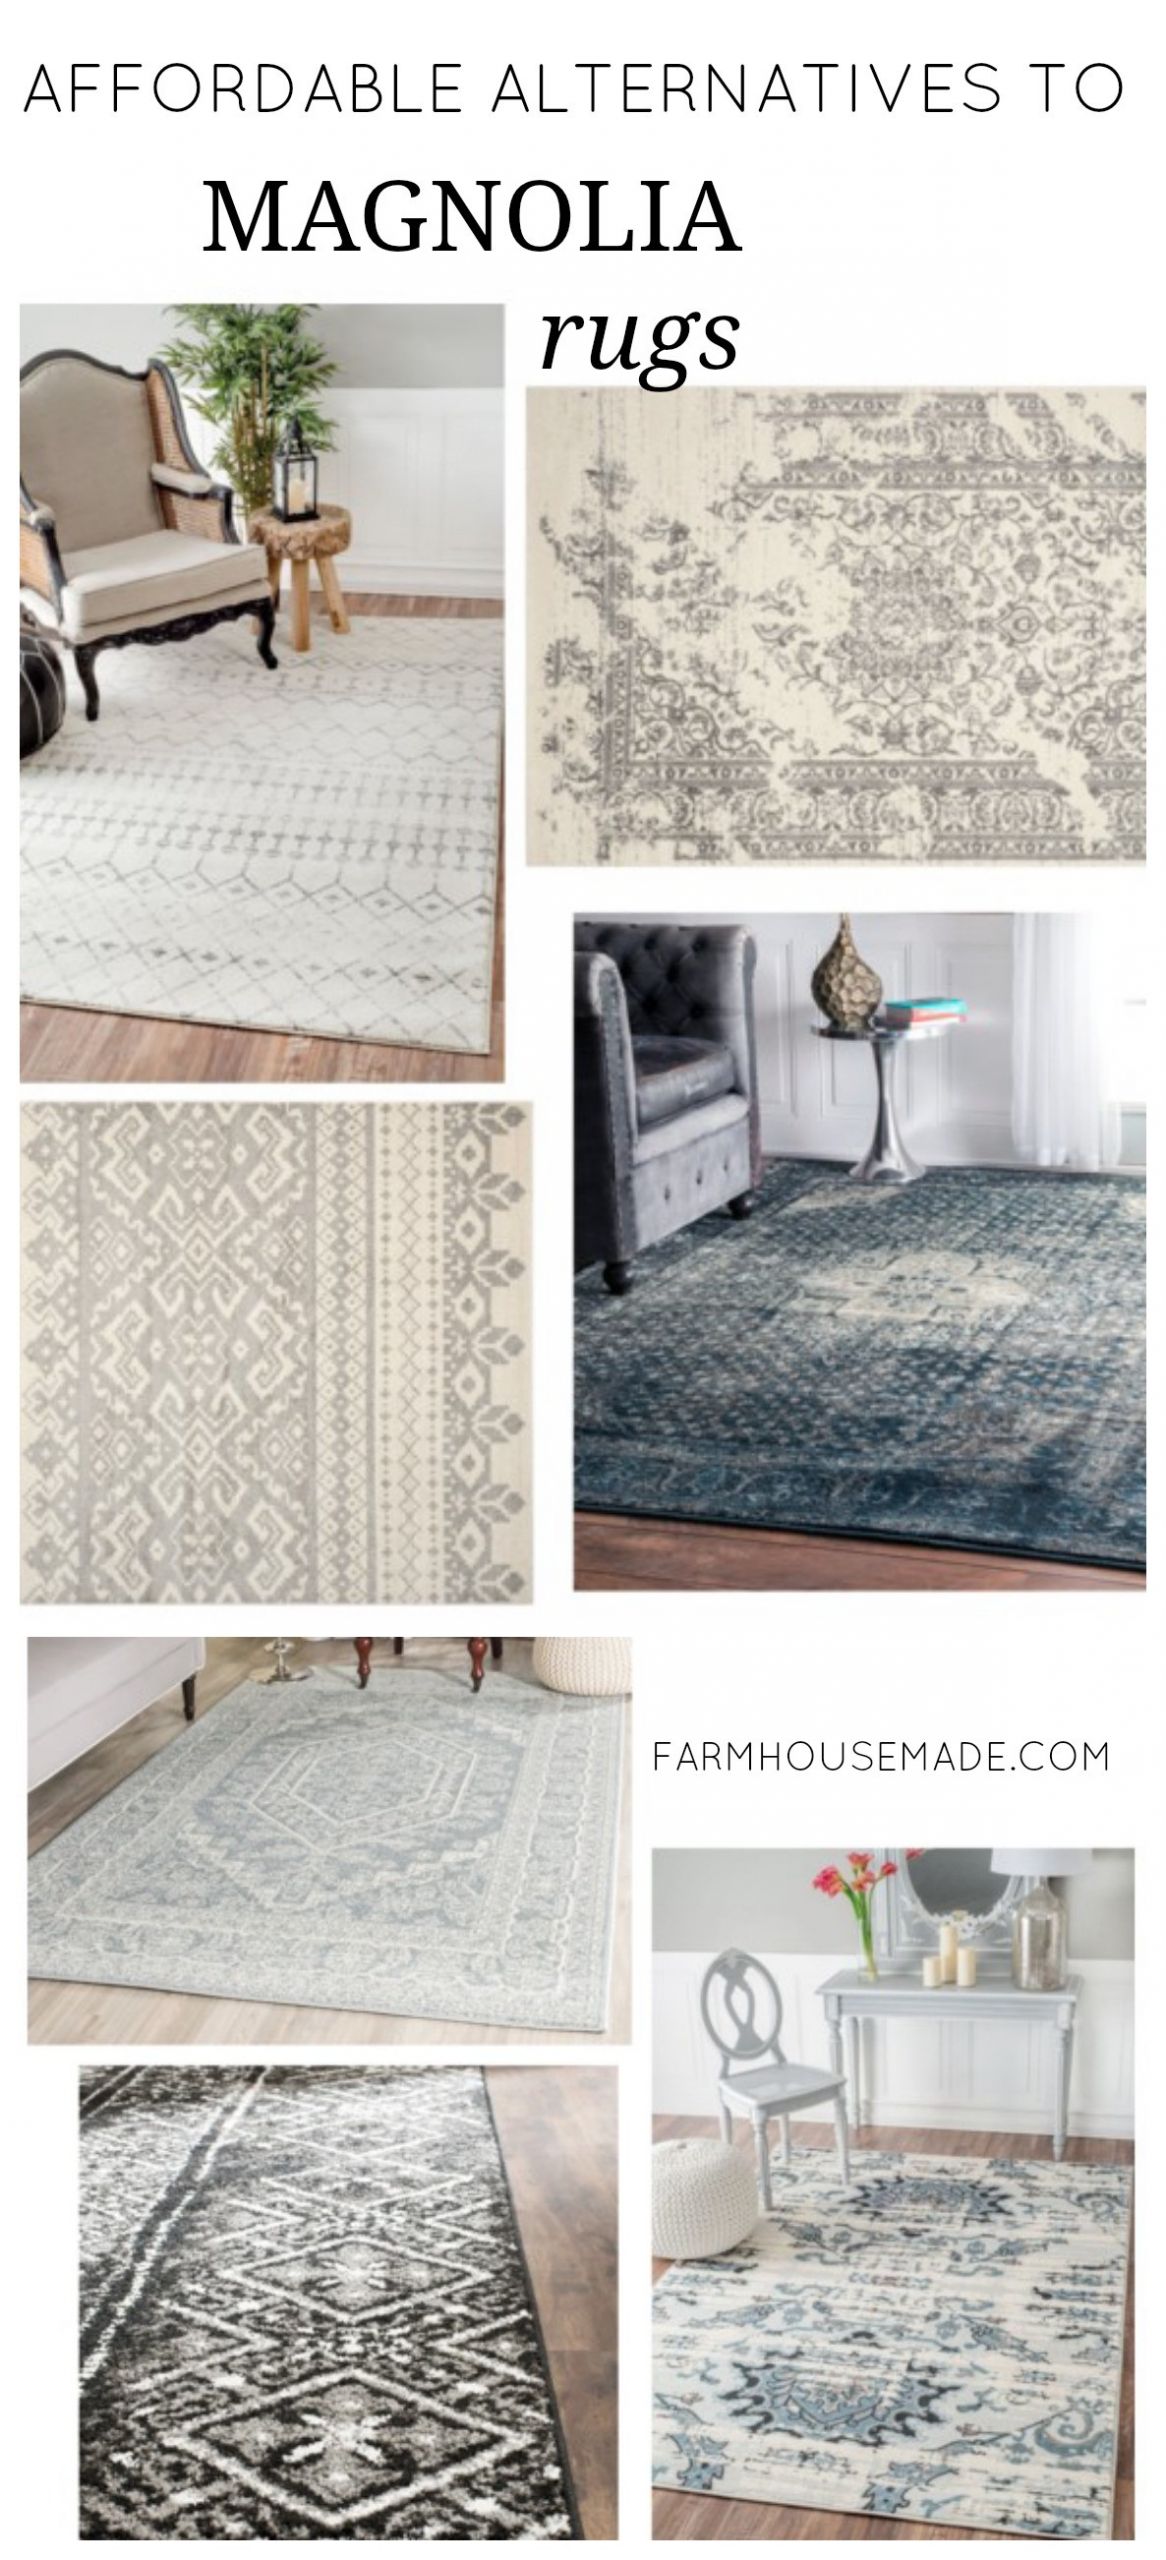 Farmhouse Living Room Rug
 What To Do When You Can t Afford Joanna s Rugs Farmhouse